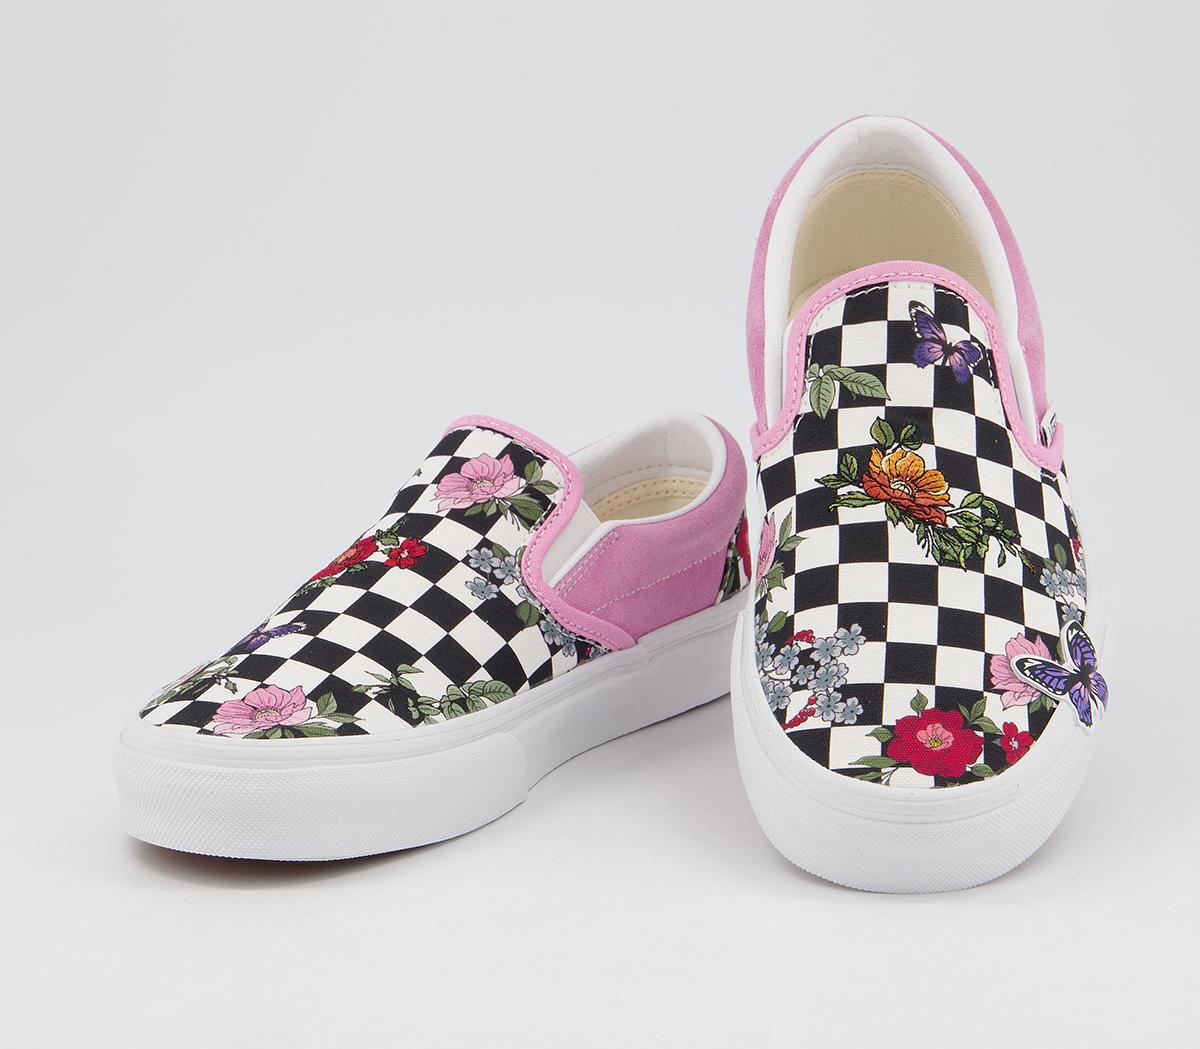 Vans Vans Classic Slip On Trainers Pink Embroidered Floral Checkerboard ...